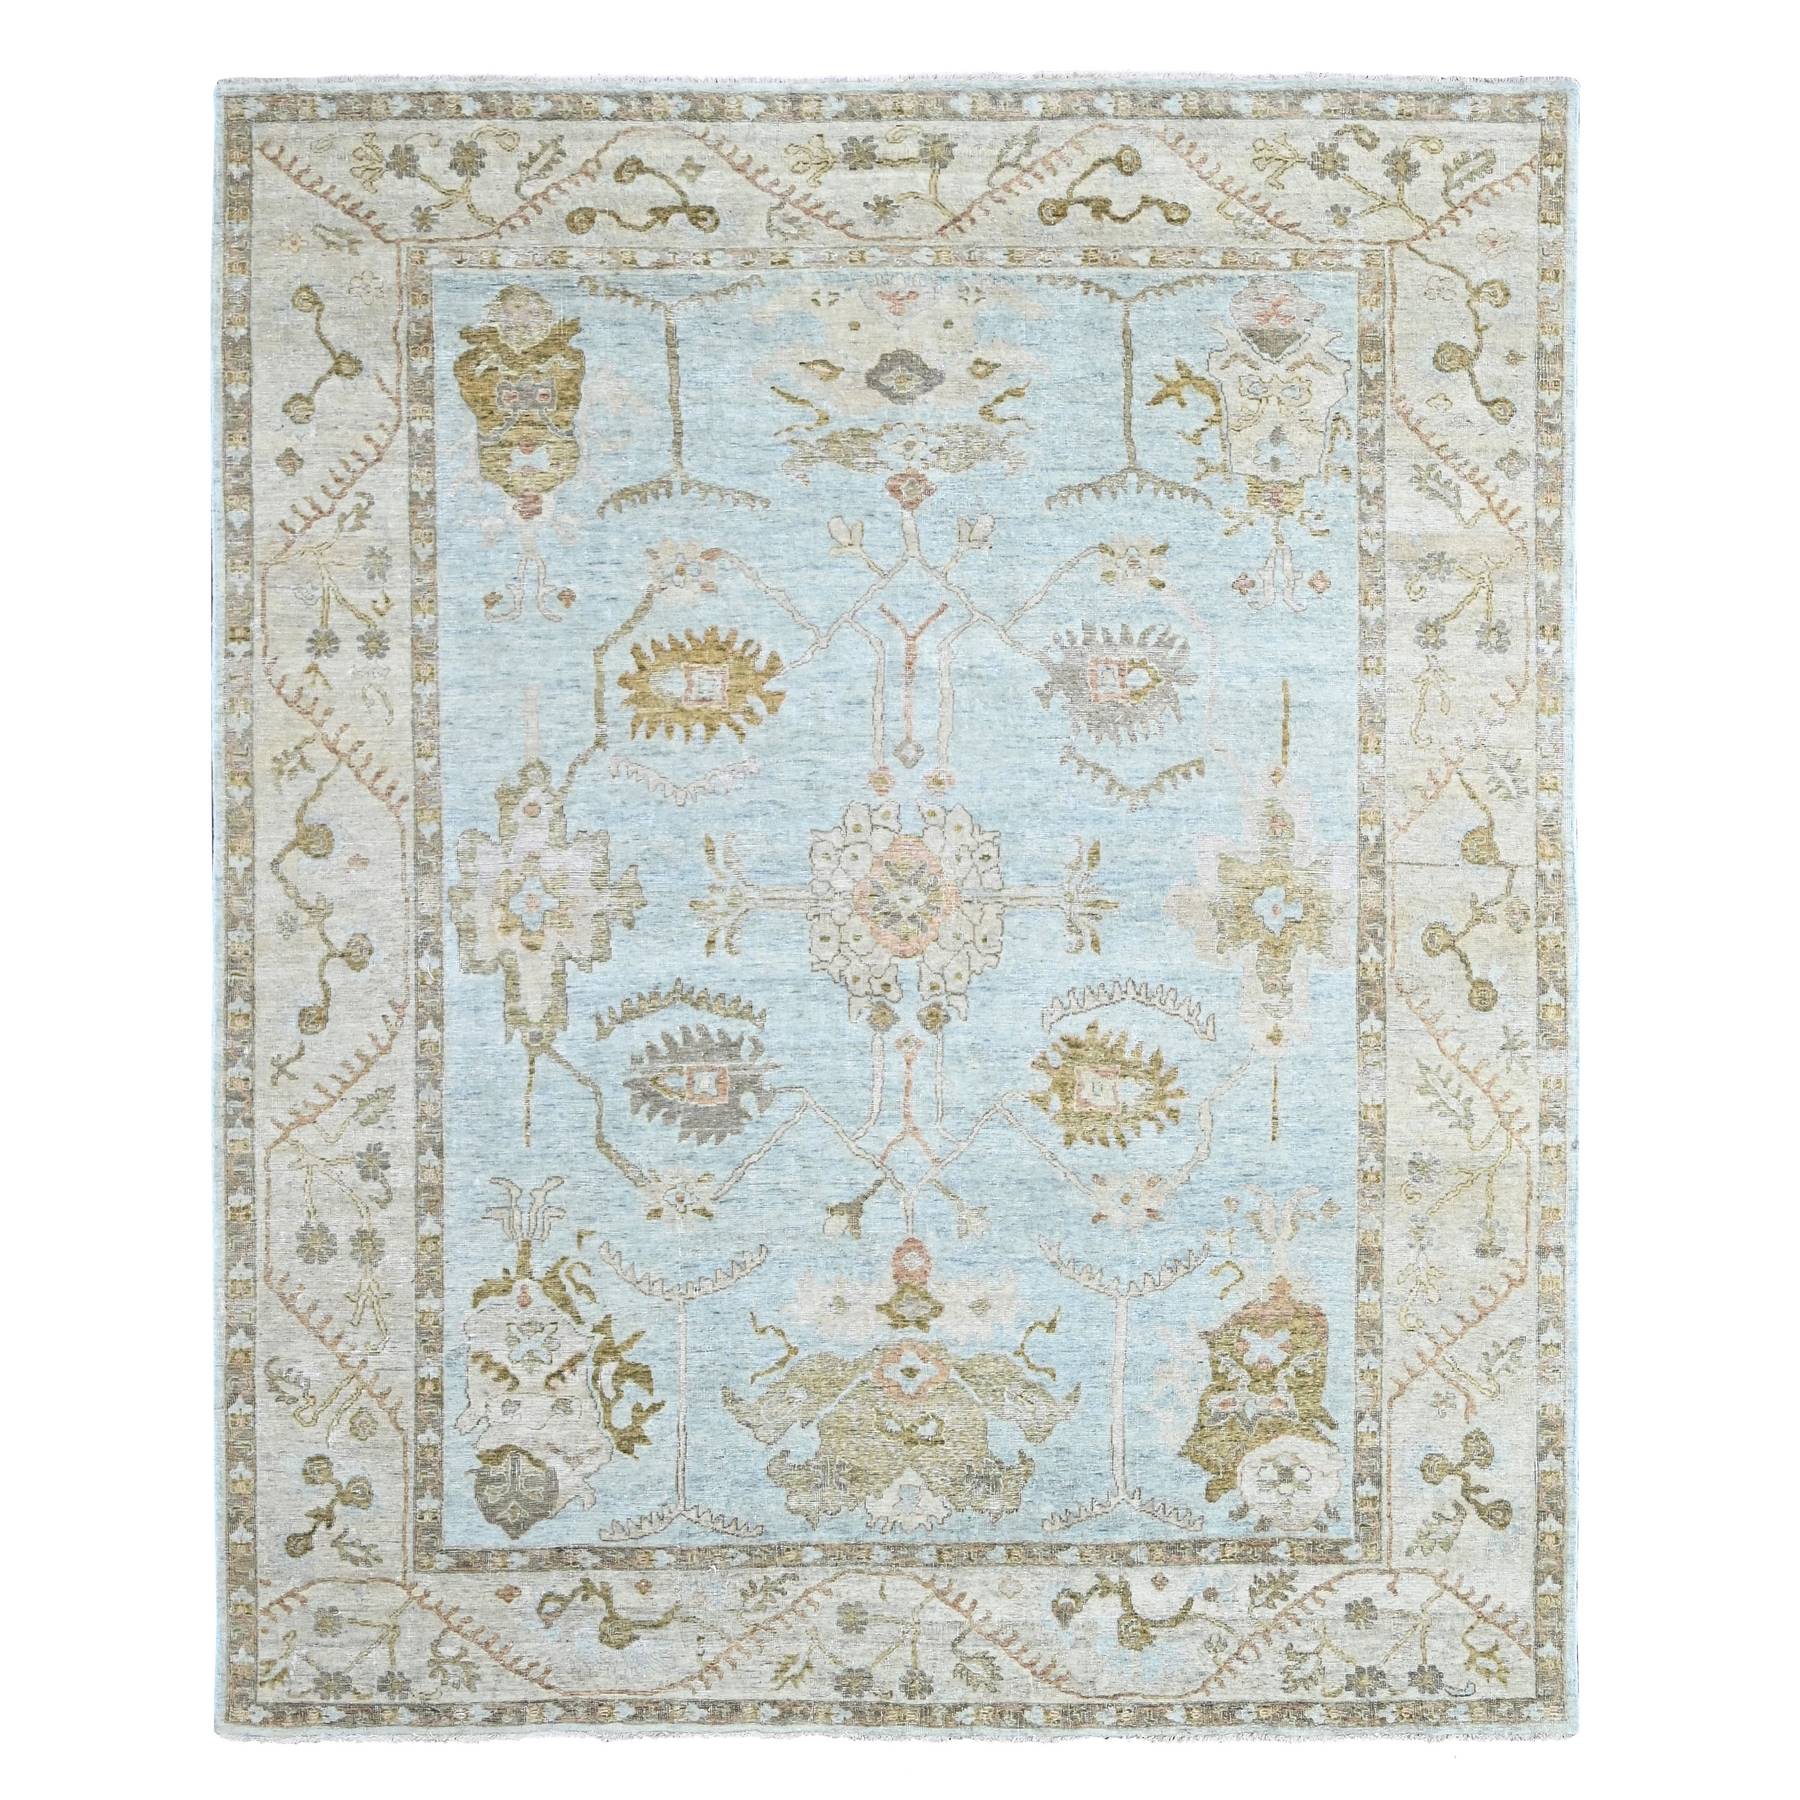 Languid Blue With Accessible Beige, Scrolling Wines Border, Distressed Look Sheared Down, Sultanabad Inspired Hand Knotted Pure Wool Oriental Rug